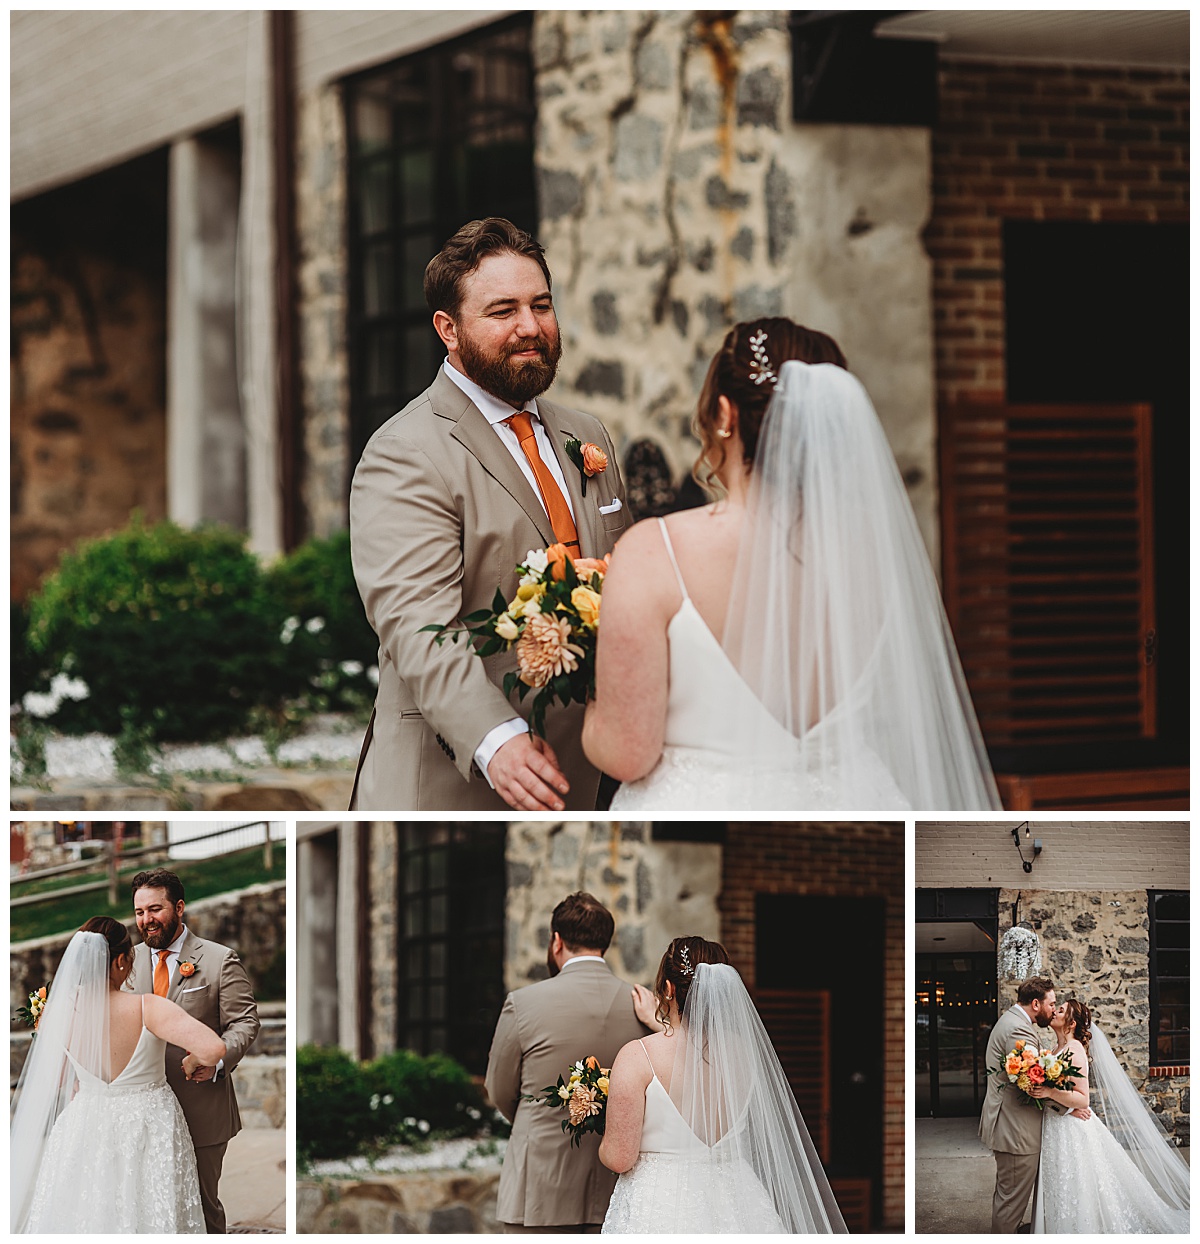 The bride and groom's first look for a summer wedding at Mainstreet Ballroom captured by Brittany Dunbar Photography, an Ellicott City Wedding Photographer.